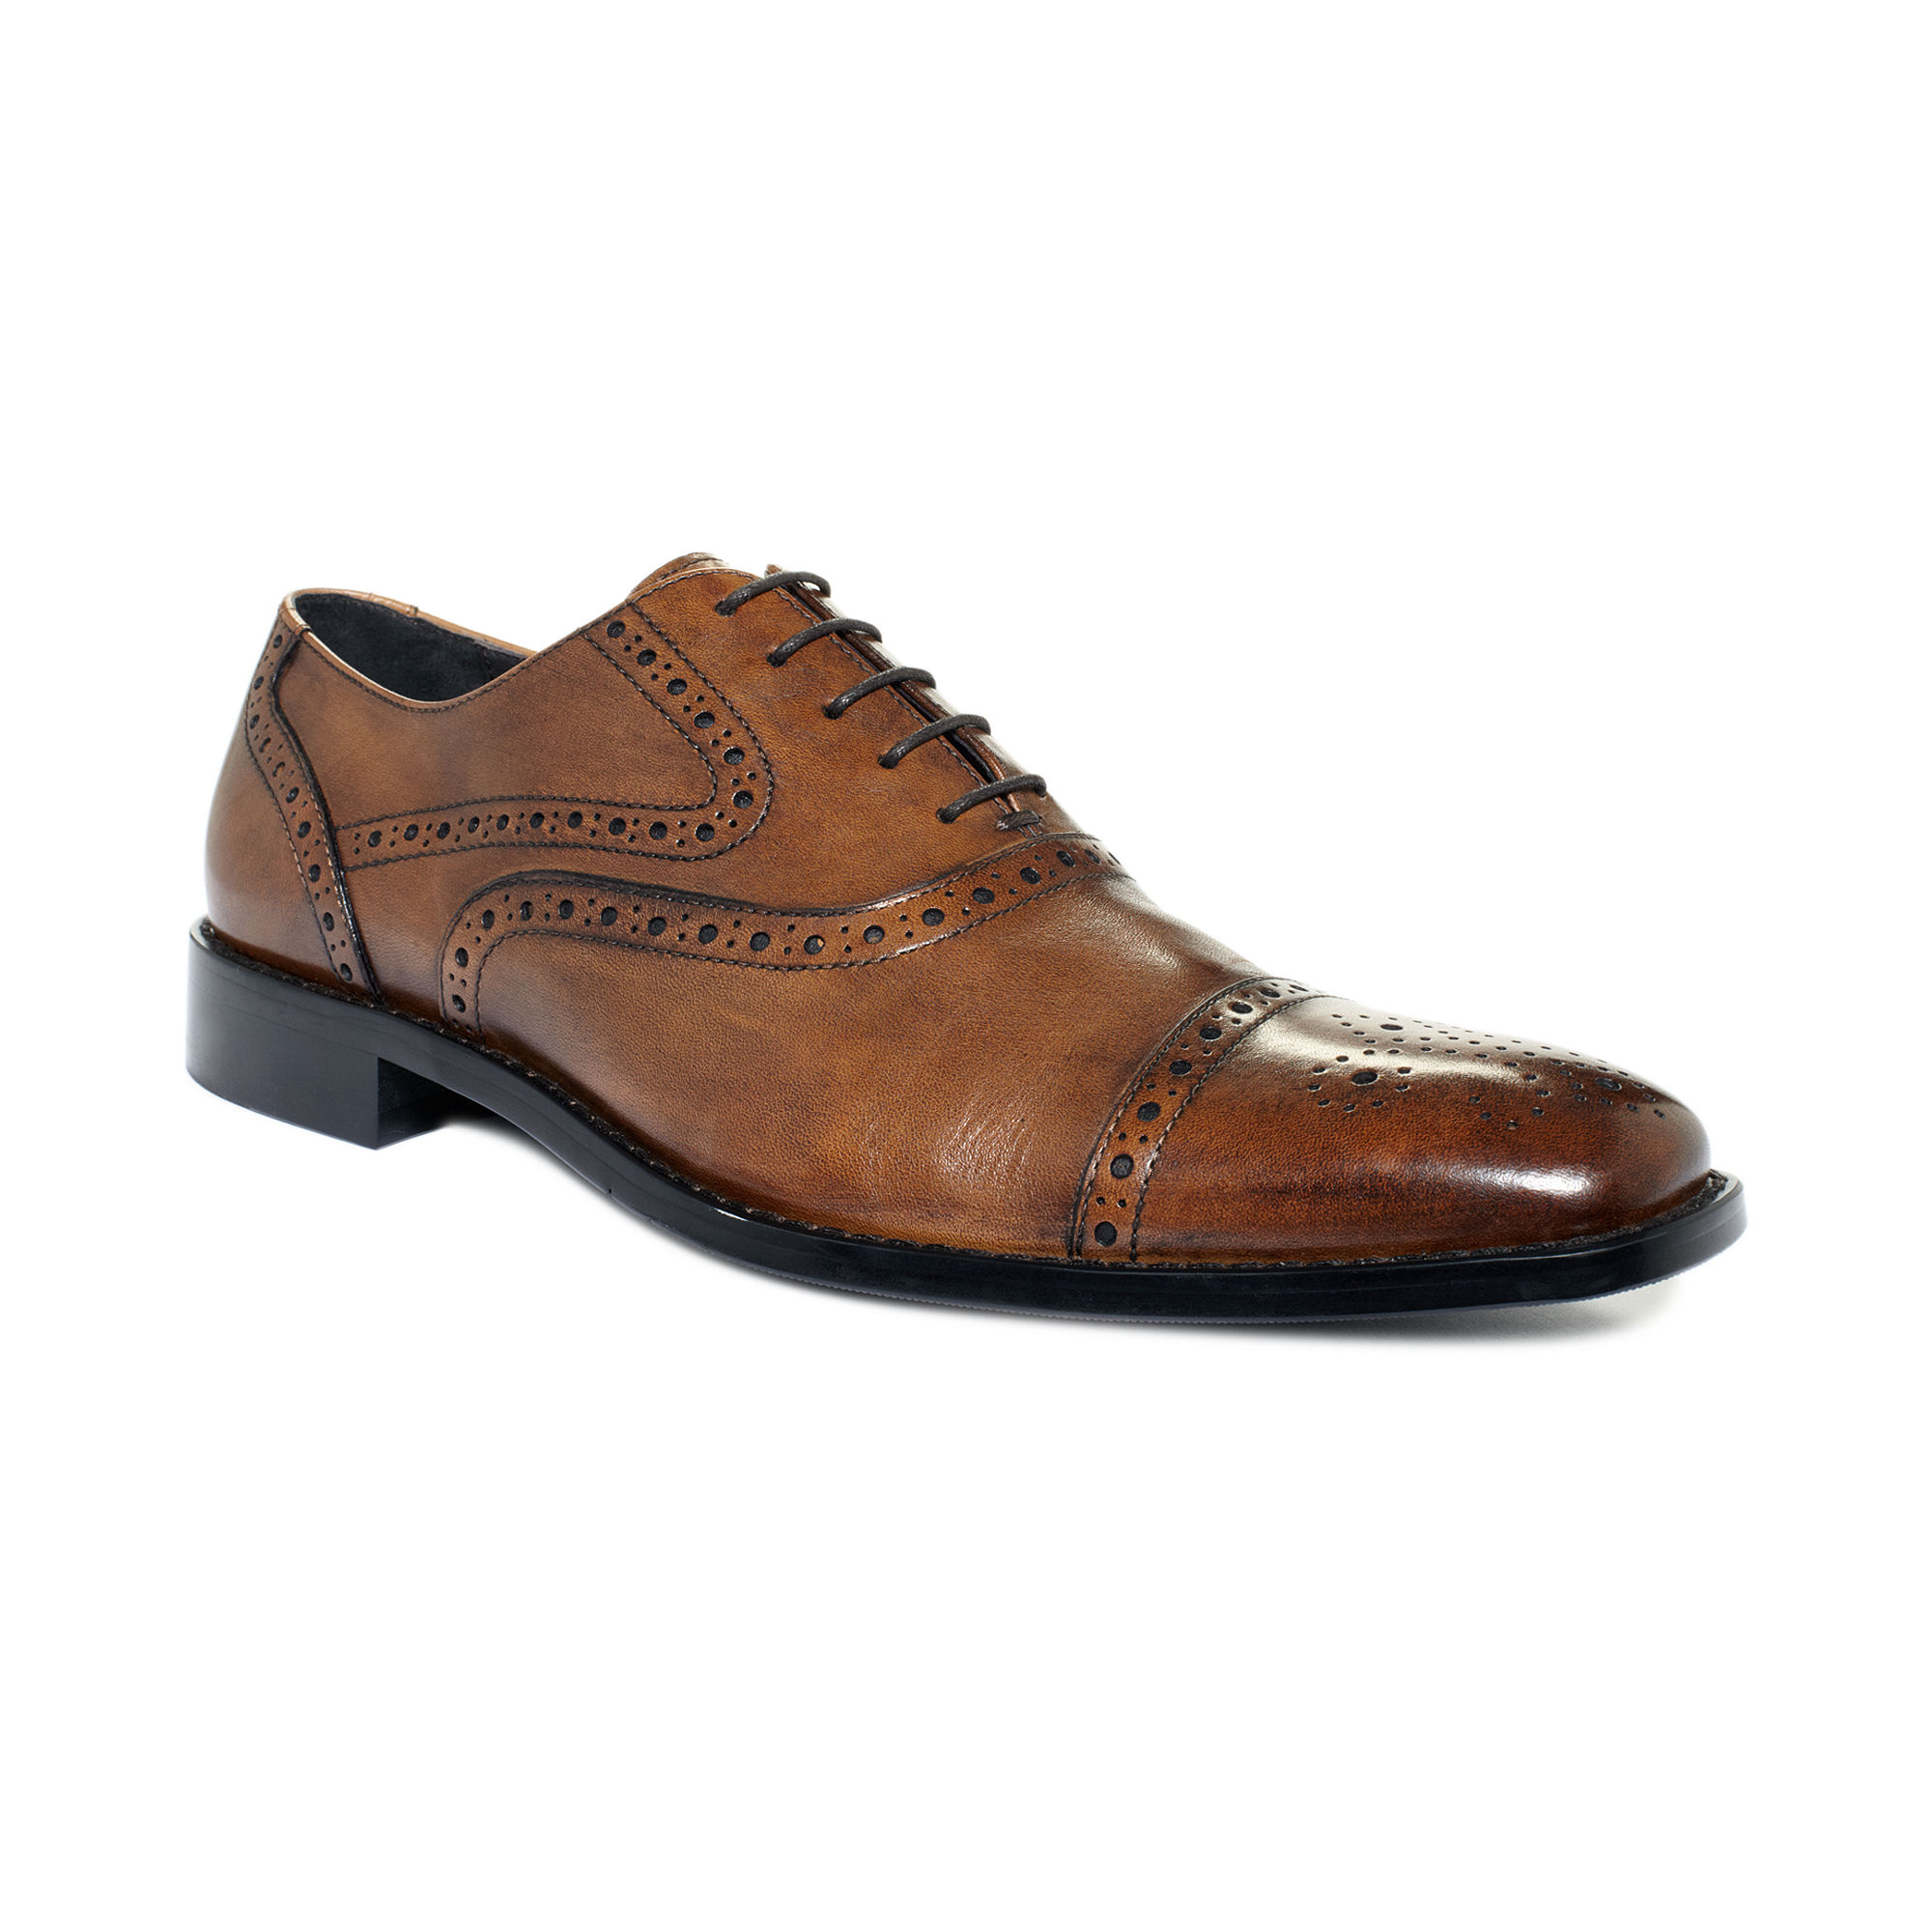 Johnston  Murphy Albright Cap Toe Lace Up Shoes in Brown for Men (tan ...